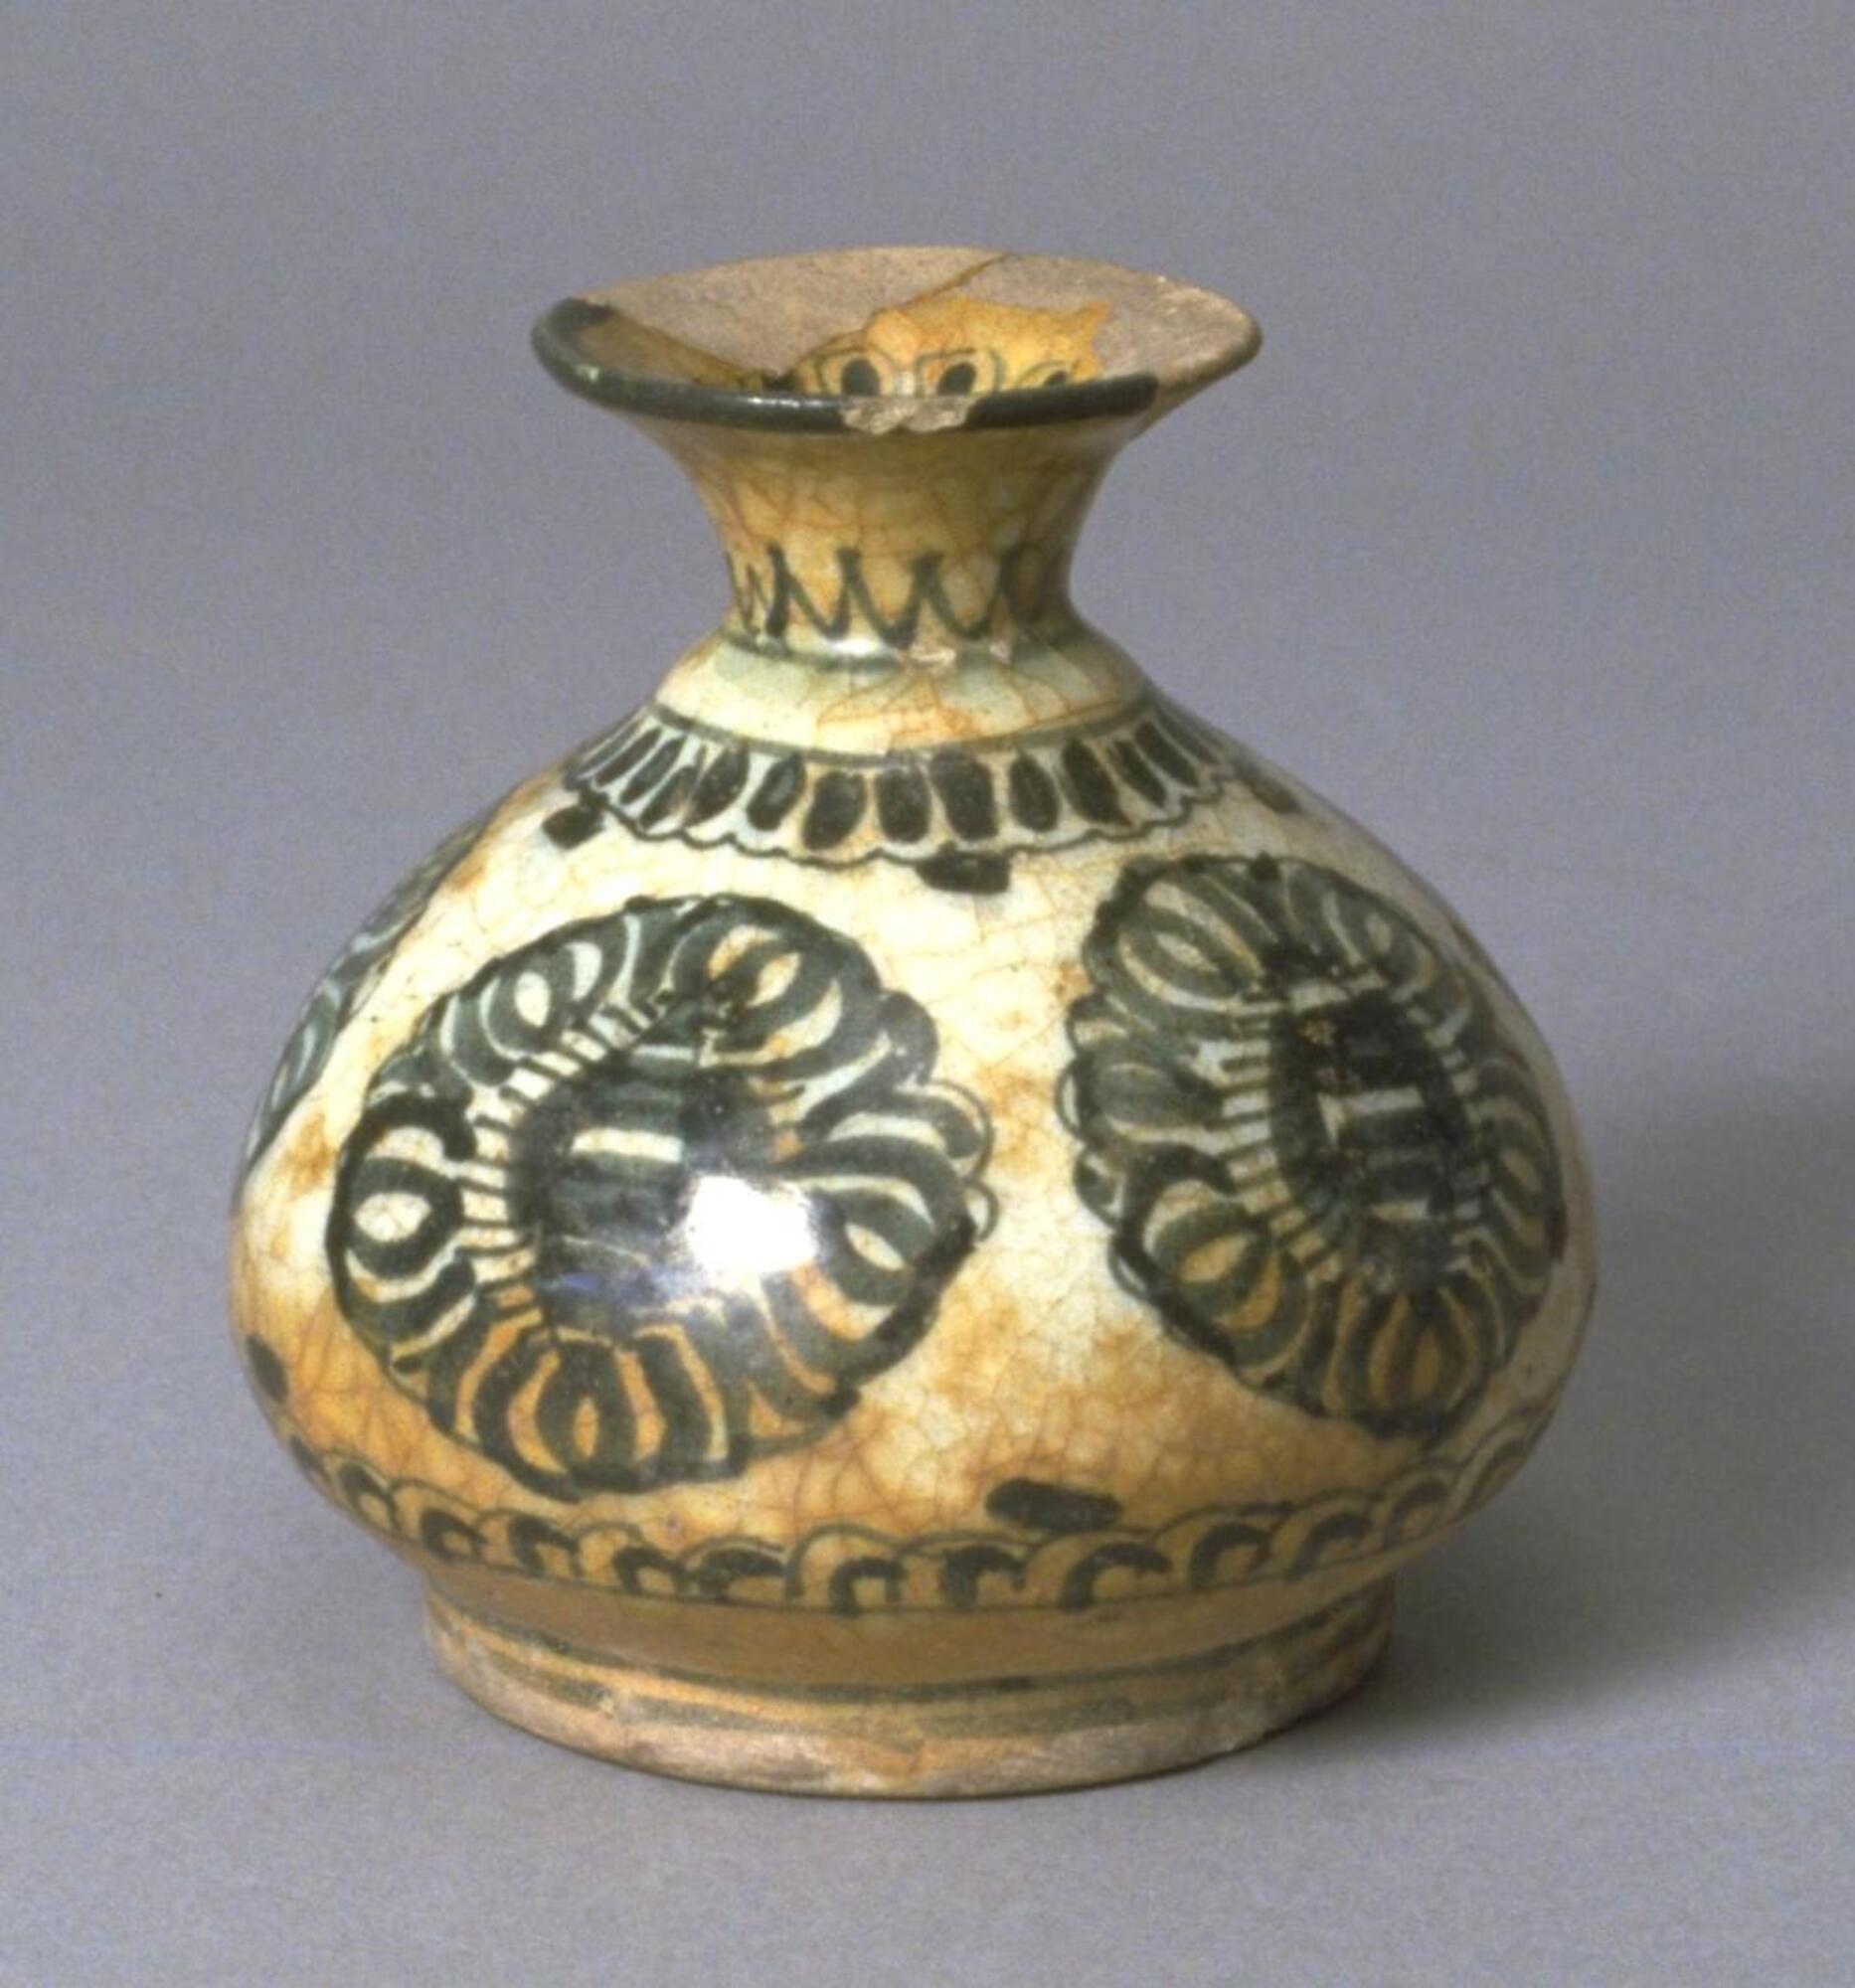 The unglazed ewer consists of two parts: a bulbous body with narrow, well-defined foot ring and short columnar neck; and a spout joined in the form of an anmial's head. A handle extends from the base of the head to the shoulder of the body. Around the upper part of the body runs an Arabic verse in Naskhi script. The moulded relief inscription is set against a background of floral scrolls. The meter is Tawil: (translated) Behold, poverty hopes for wealth, while wealth fears poverty." The verse appears in the 'Iqd al-Farid, compiled by Ibn 'Abd Rabbihi, who attributes it to 'Ali. The column above the body narrows to form a shoulder, on which the head has been set. The head is a cone, the narrow end of which serves as the animal's nose and has a small hole for pouring out the contents of the ewer. Over the base of the cone jut two pointed ears. Two loops are fastened below them to the shoulder of the neck. Small discs, serving as eyes, have been applied in the front of the ears. The hole for insertion of the liq